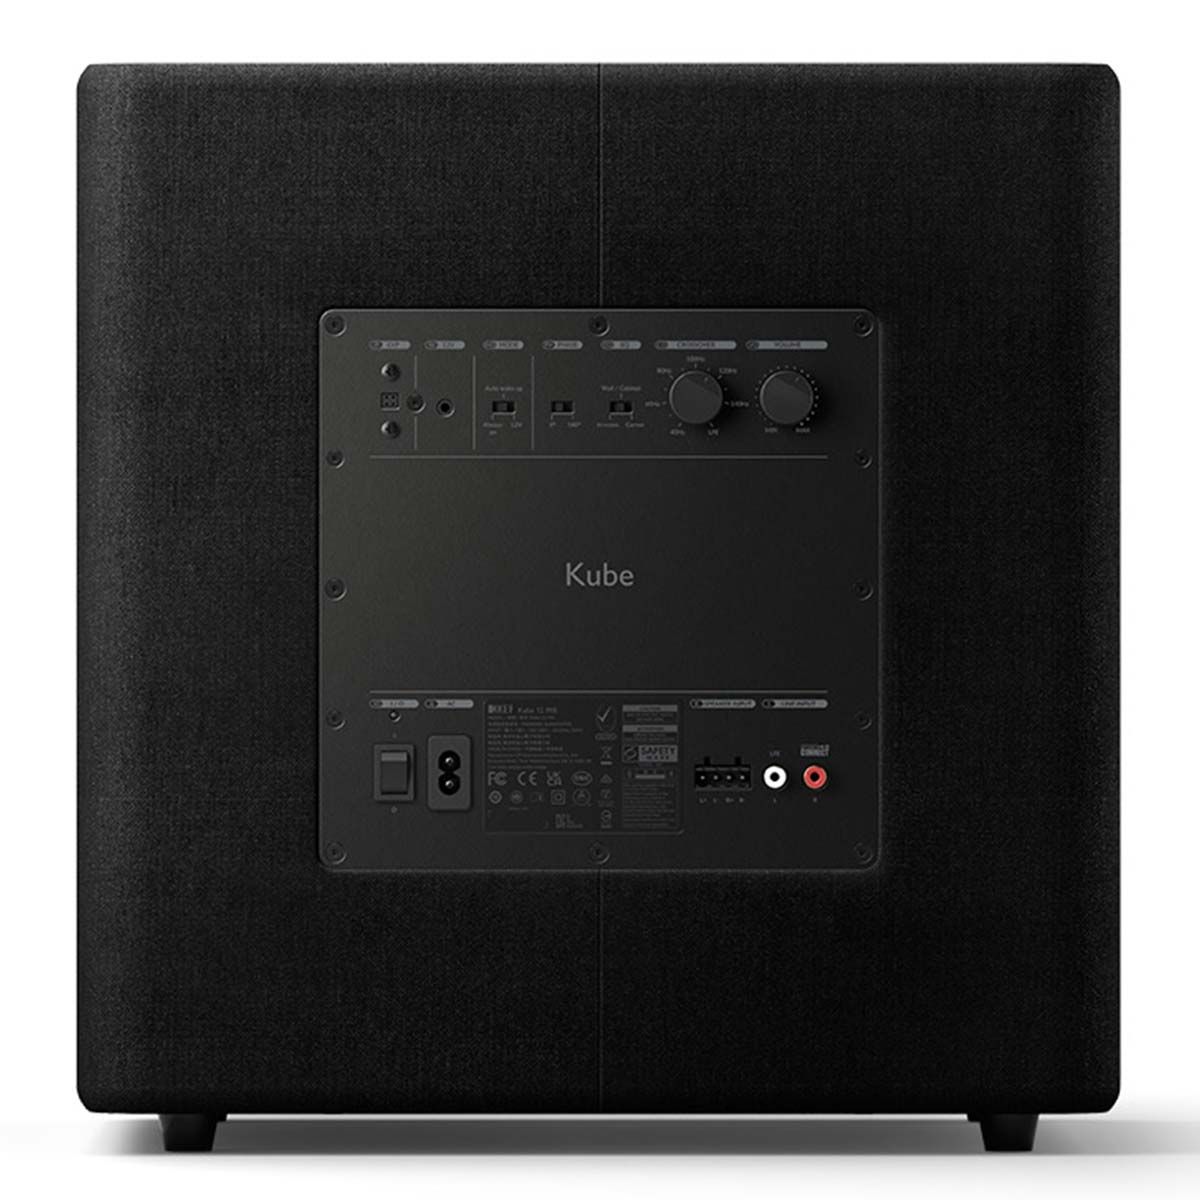 KEF Kube 12 MIE Subwoofer - Black rear view